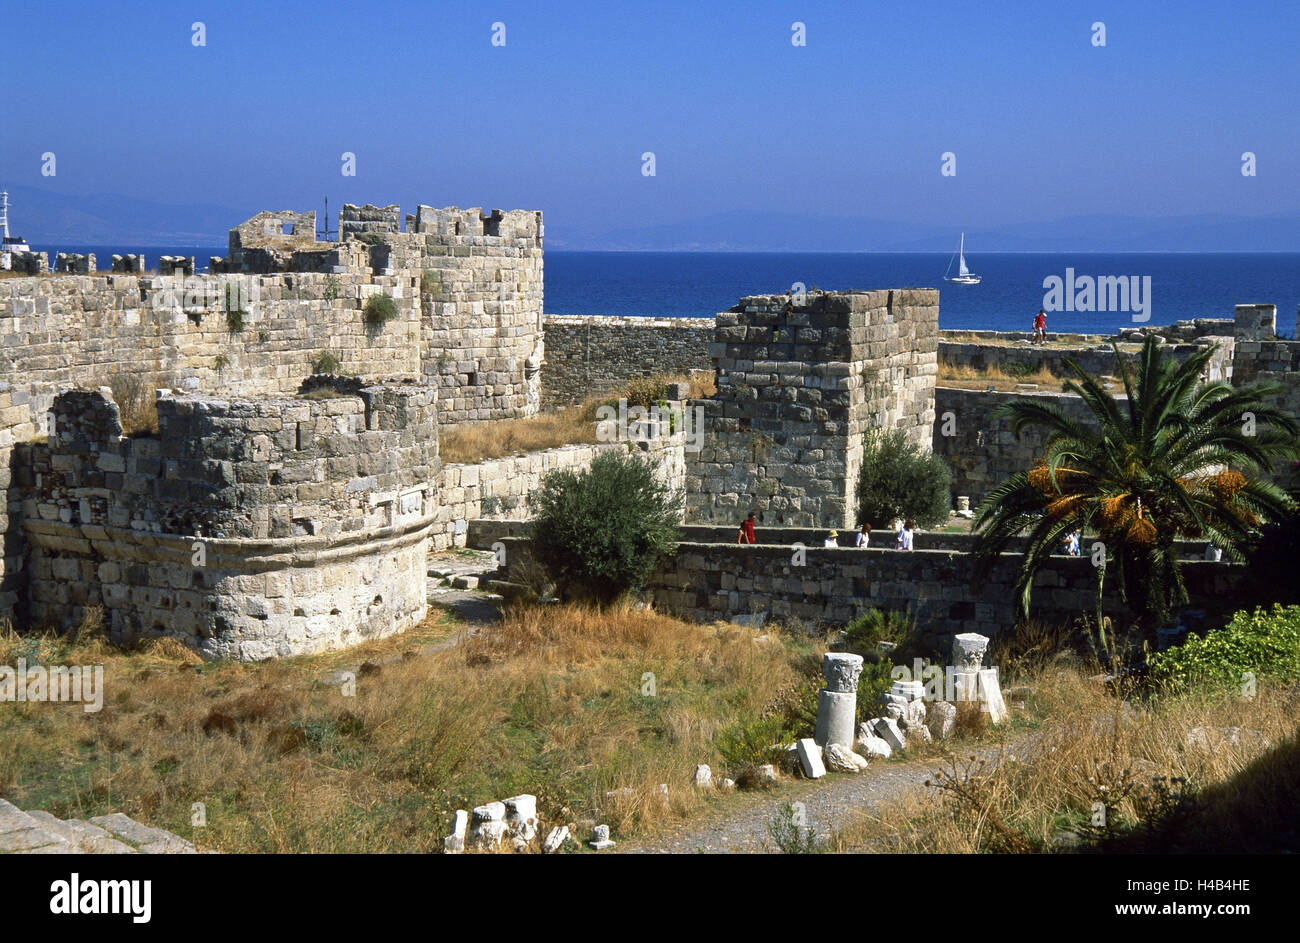 Greece, Dodekanes, island Fondling, Kos town, fort Neratzia, visitor, sea, island group, Mediterranean island, the Aegean Sea, town, port, Maltese Knight's fort, Maltese Knight's fortress, fortress area, structure, historically, harbour fort, fortress, Kastro, fortress ruin, fortress defensive walls, towers, defensive walls, people, place of interest, Stock Photo